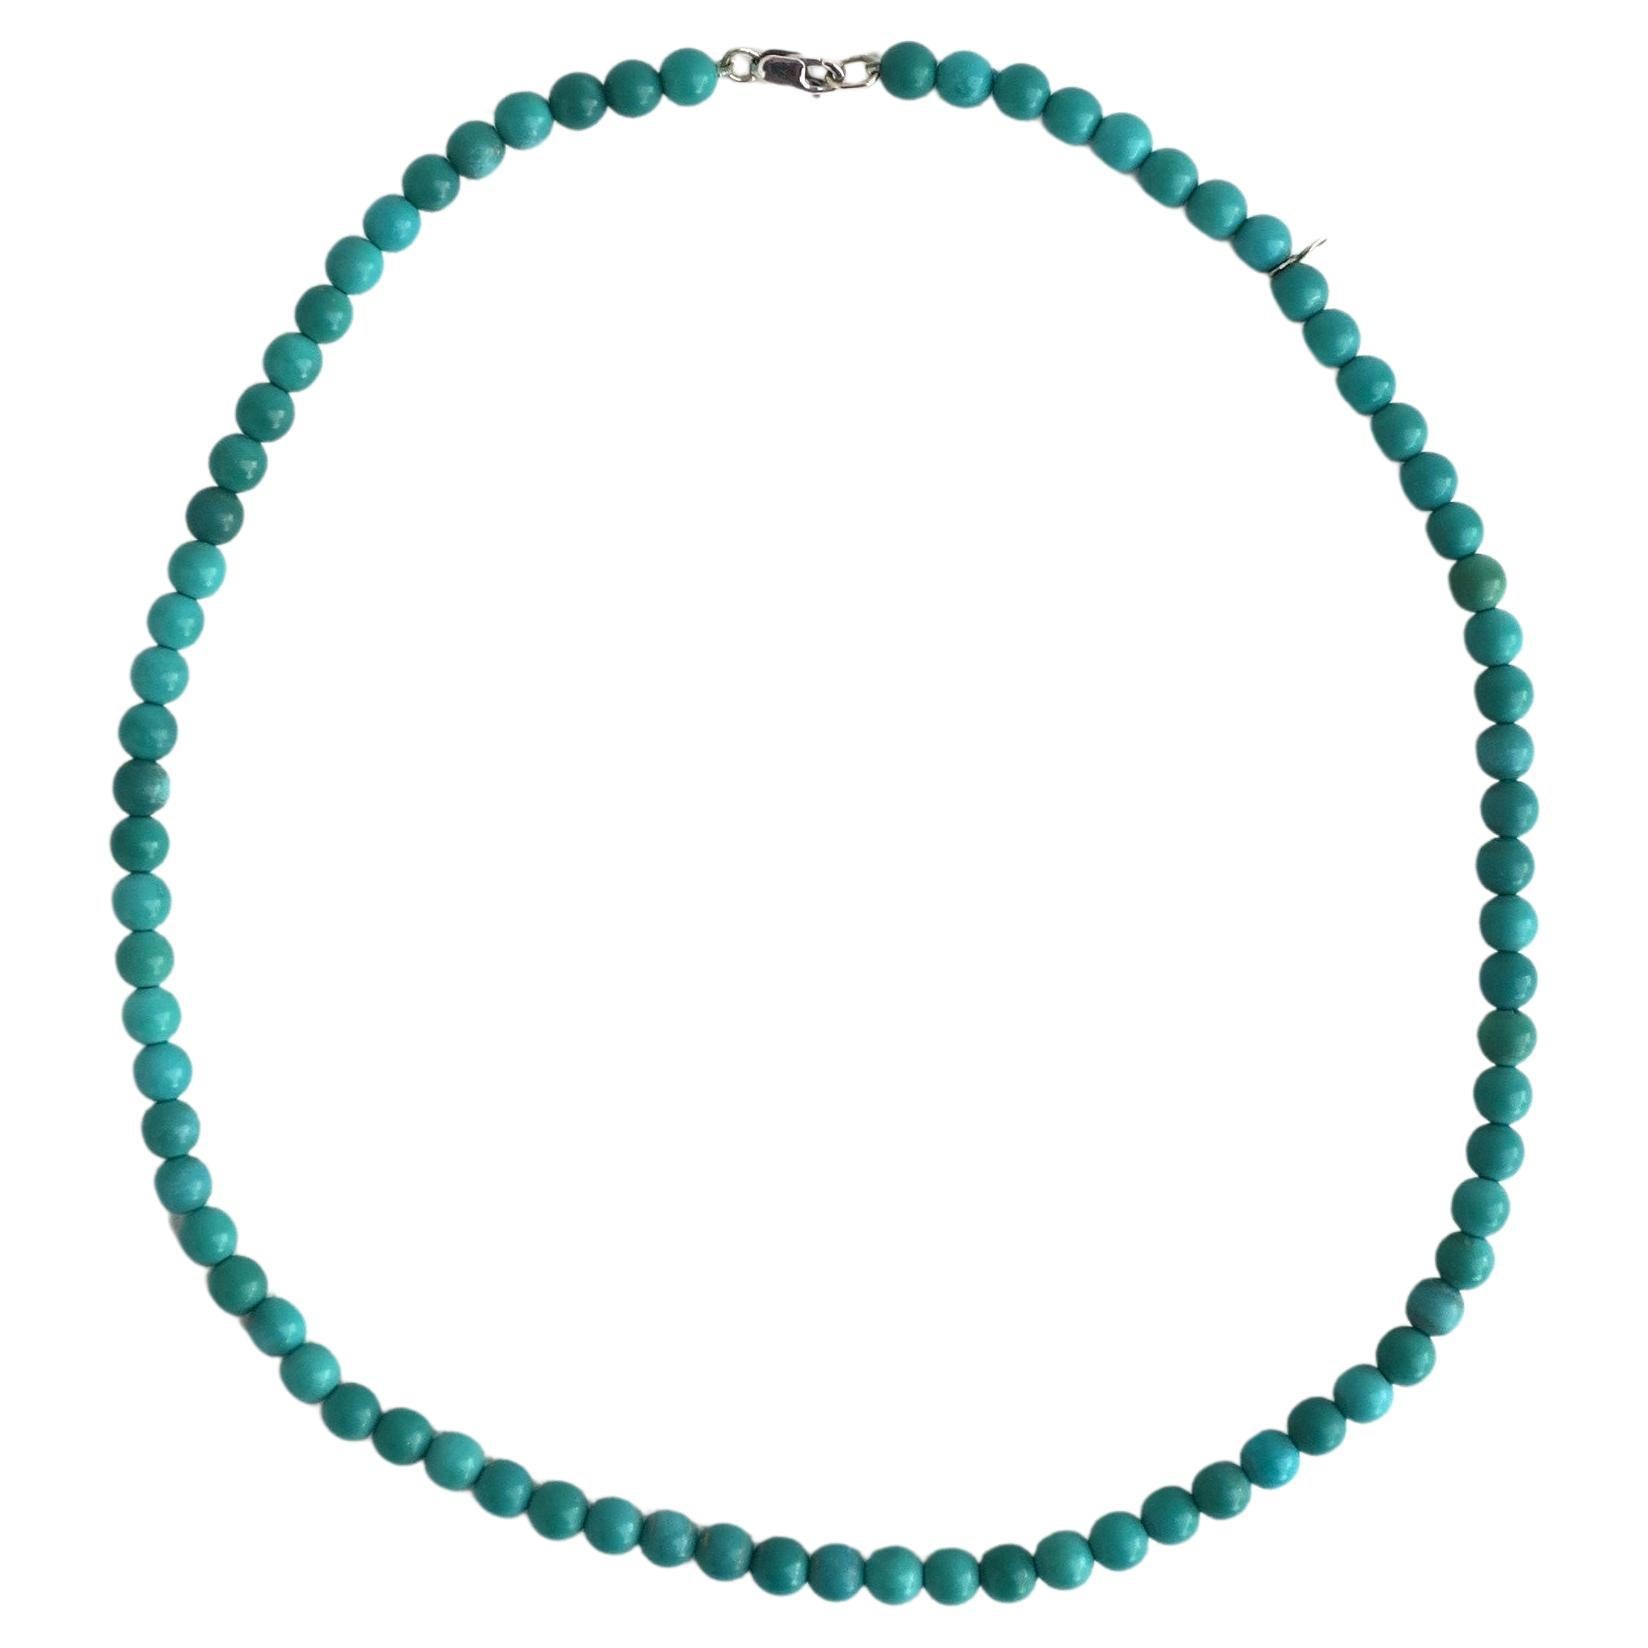 Turquoise Necklace Choker Necklace